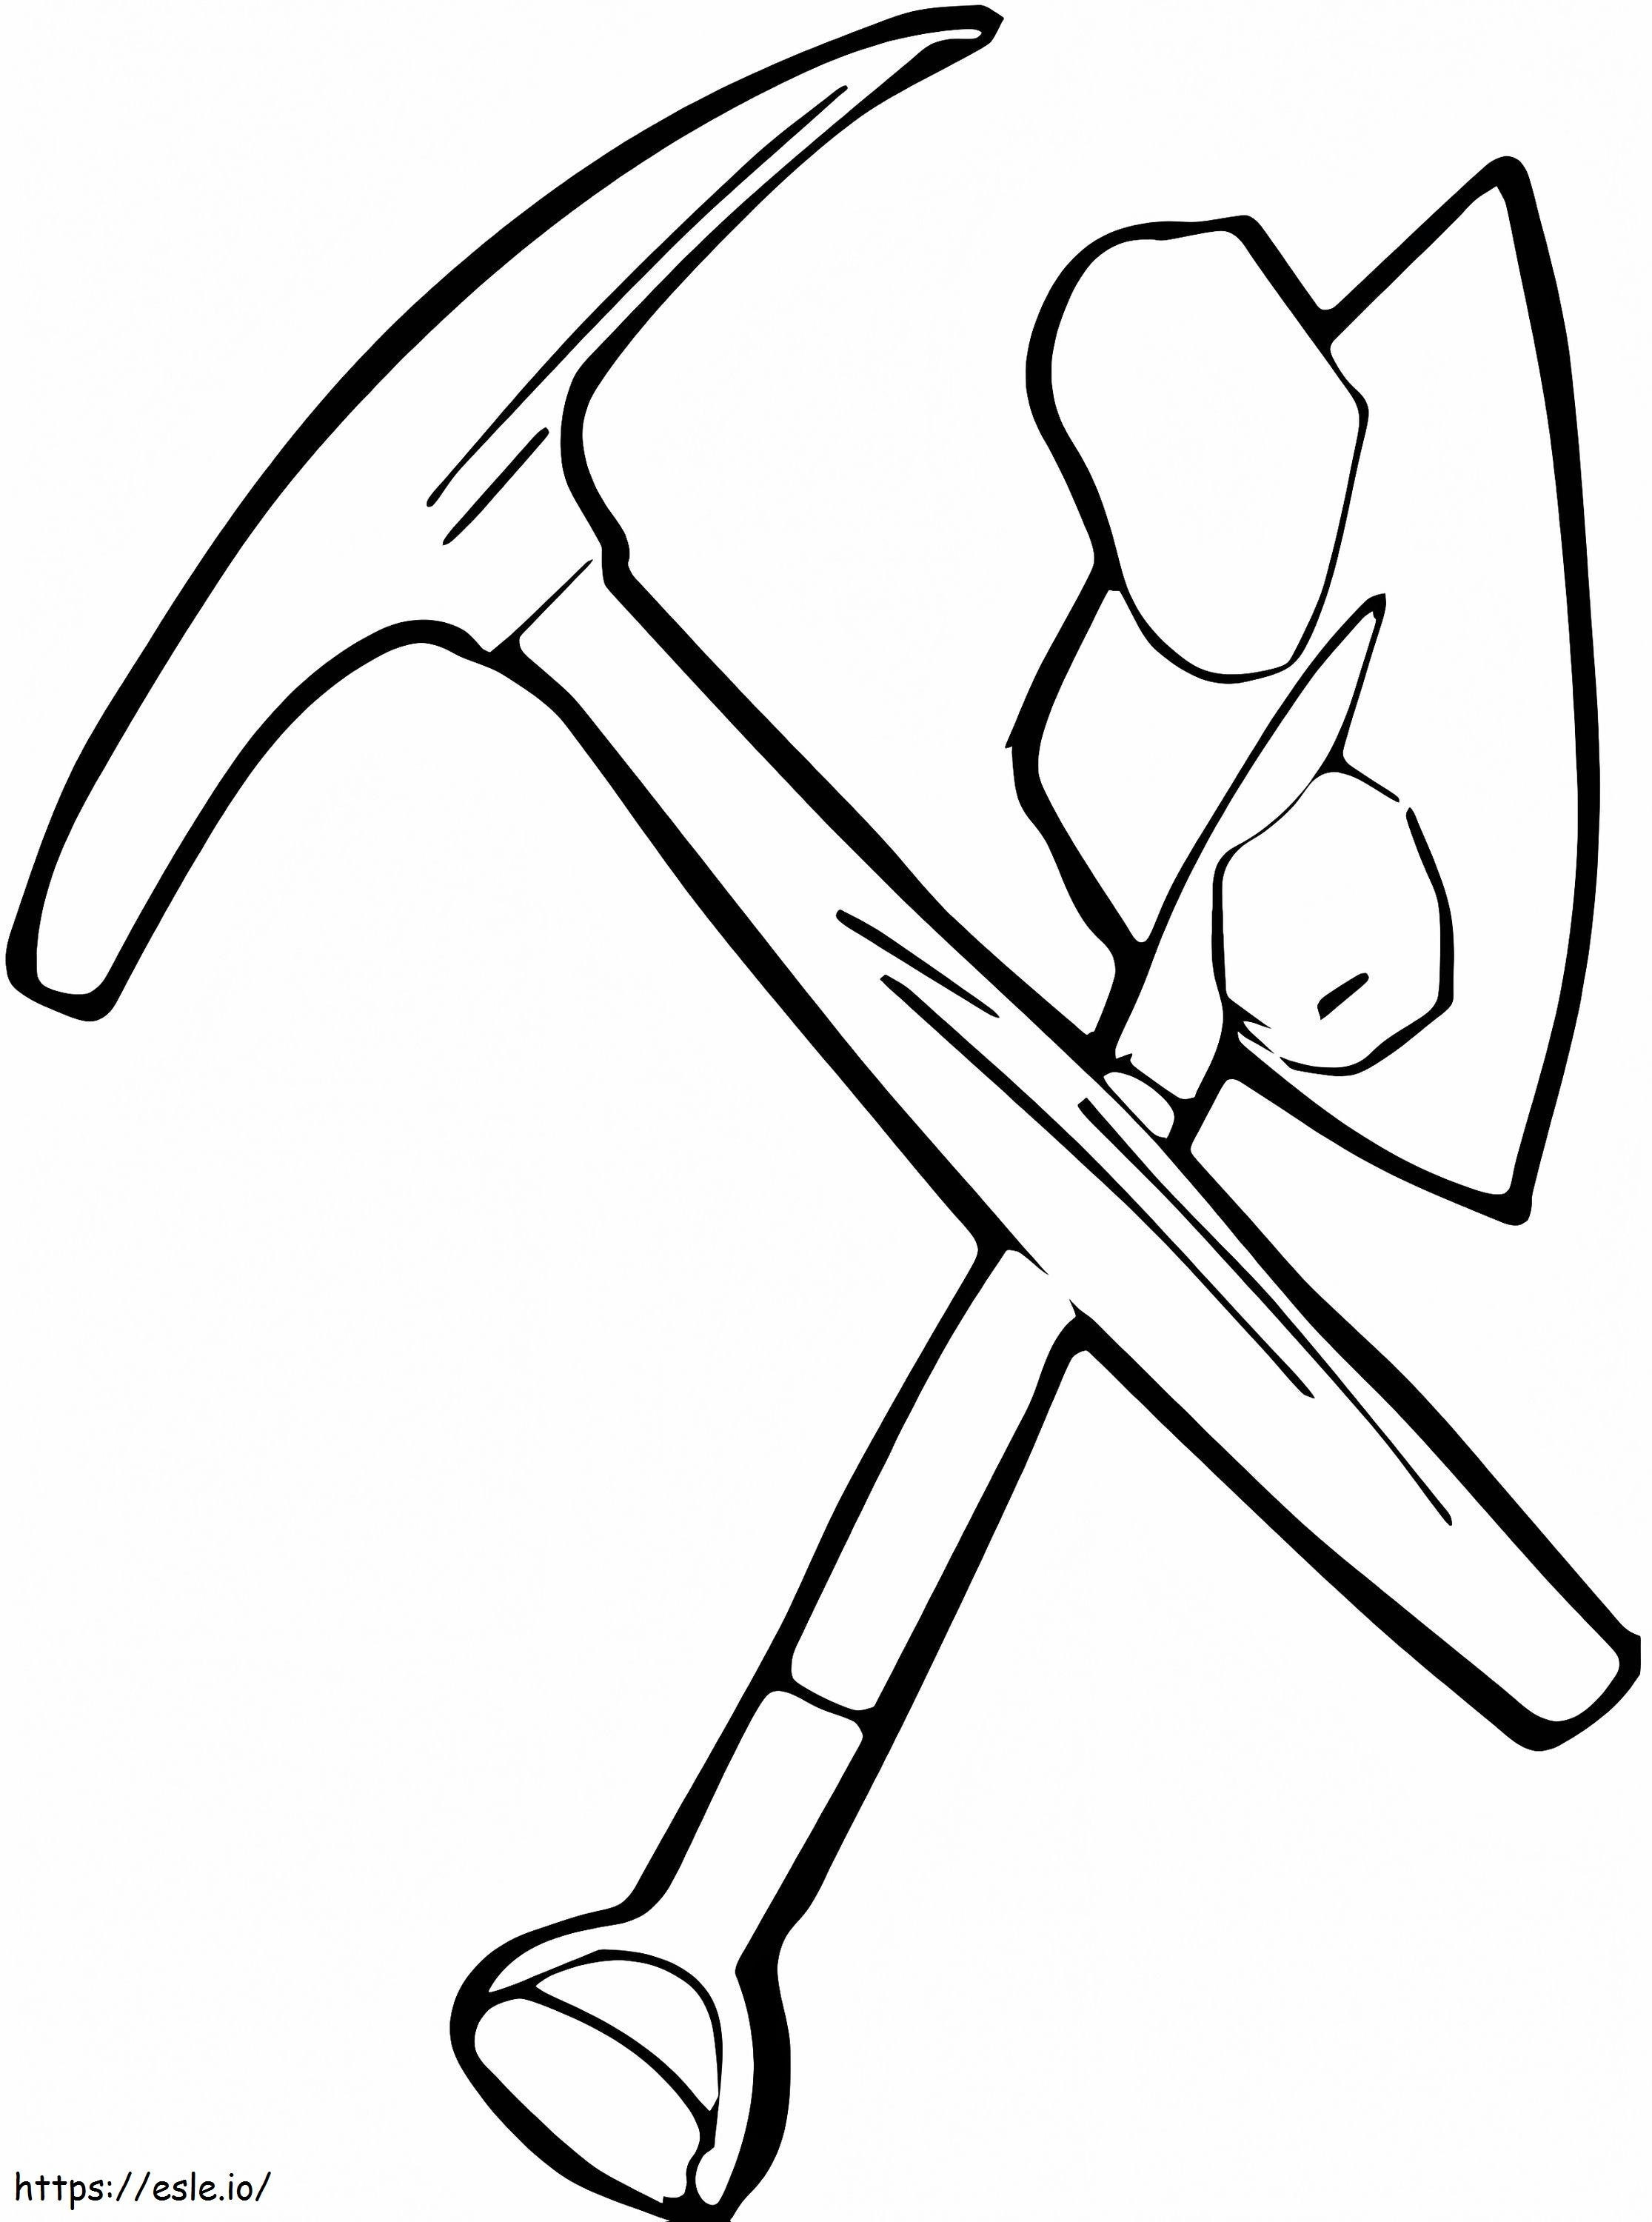 Shovel And Pickaxe coloring page